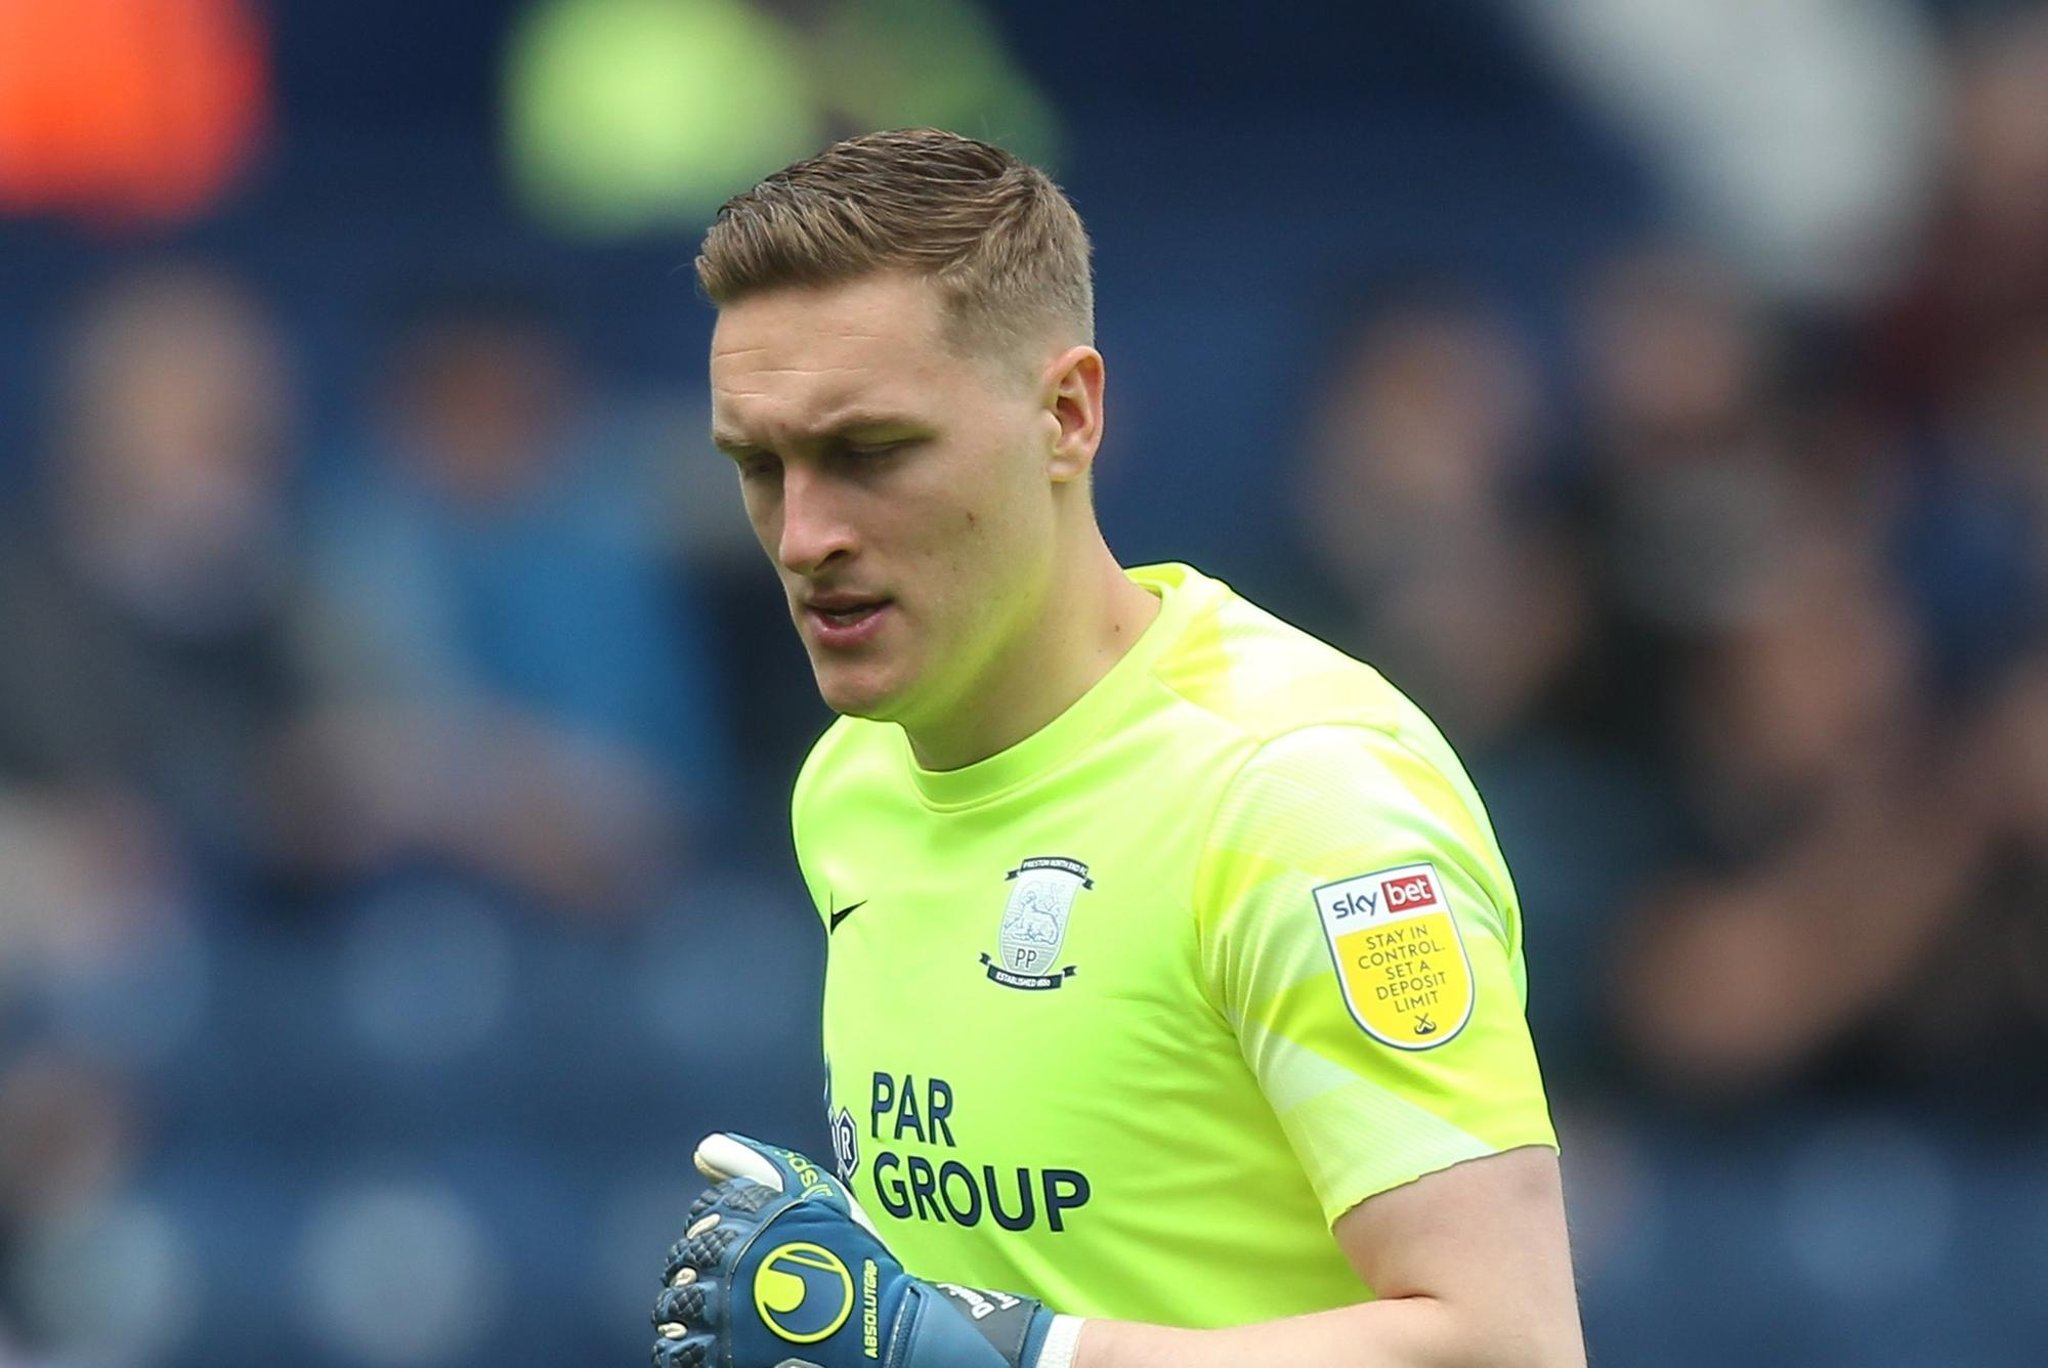 Preston North End goalkeeper returns to Leicester City with three player of the year awards